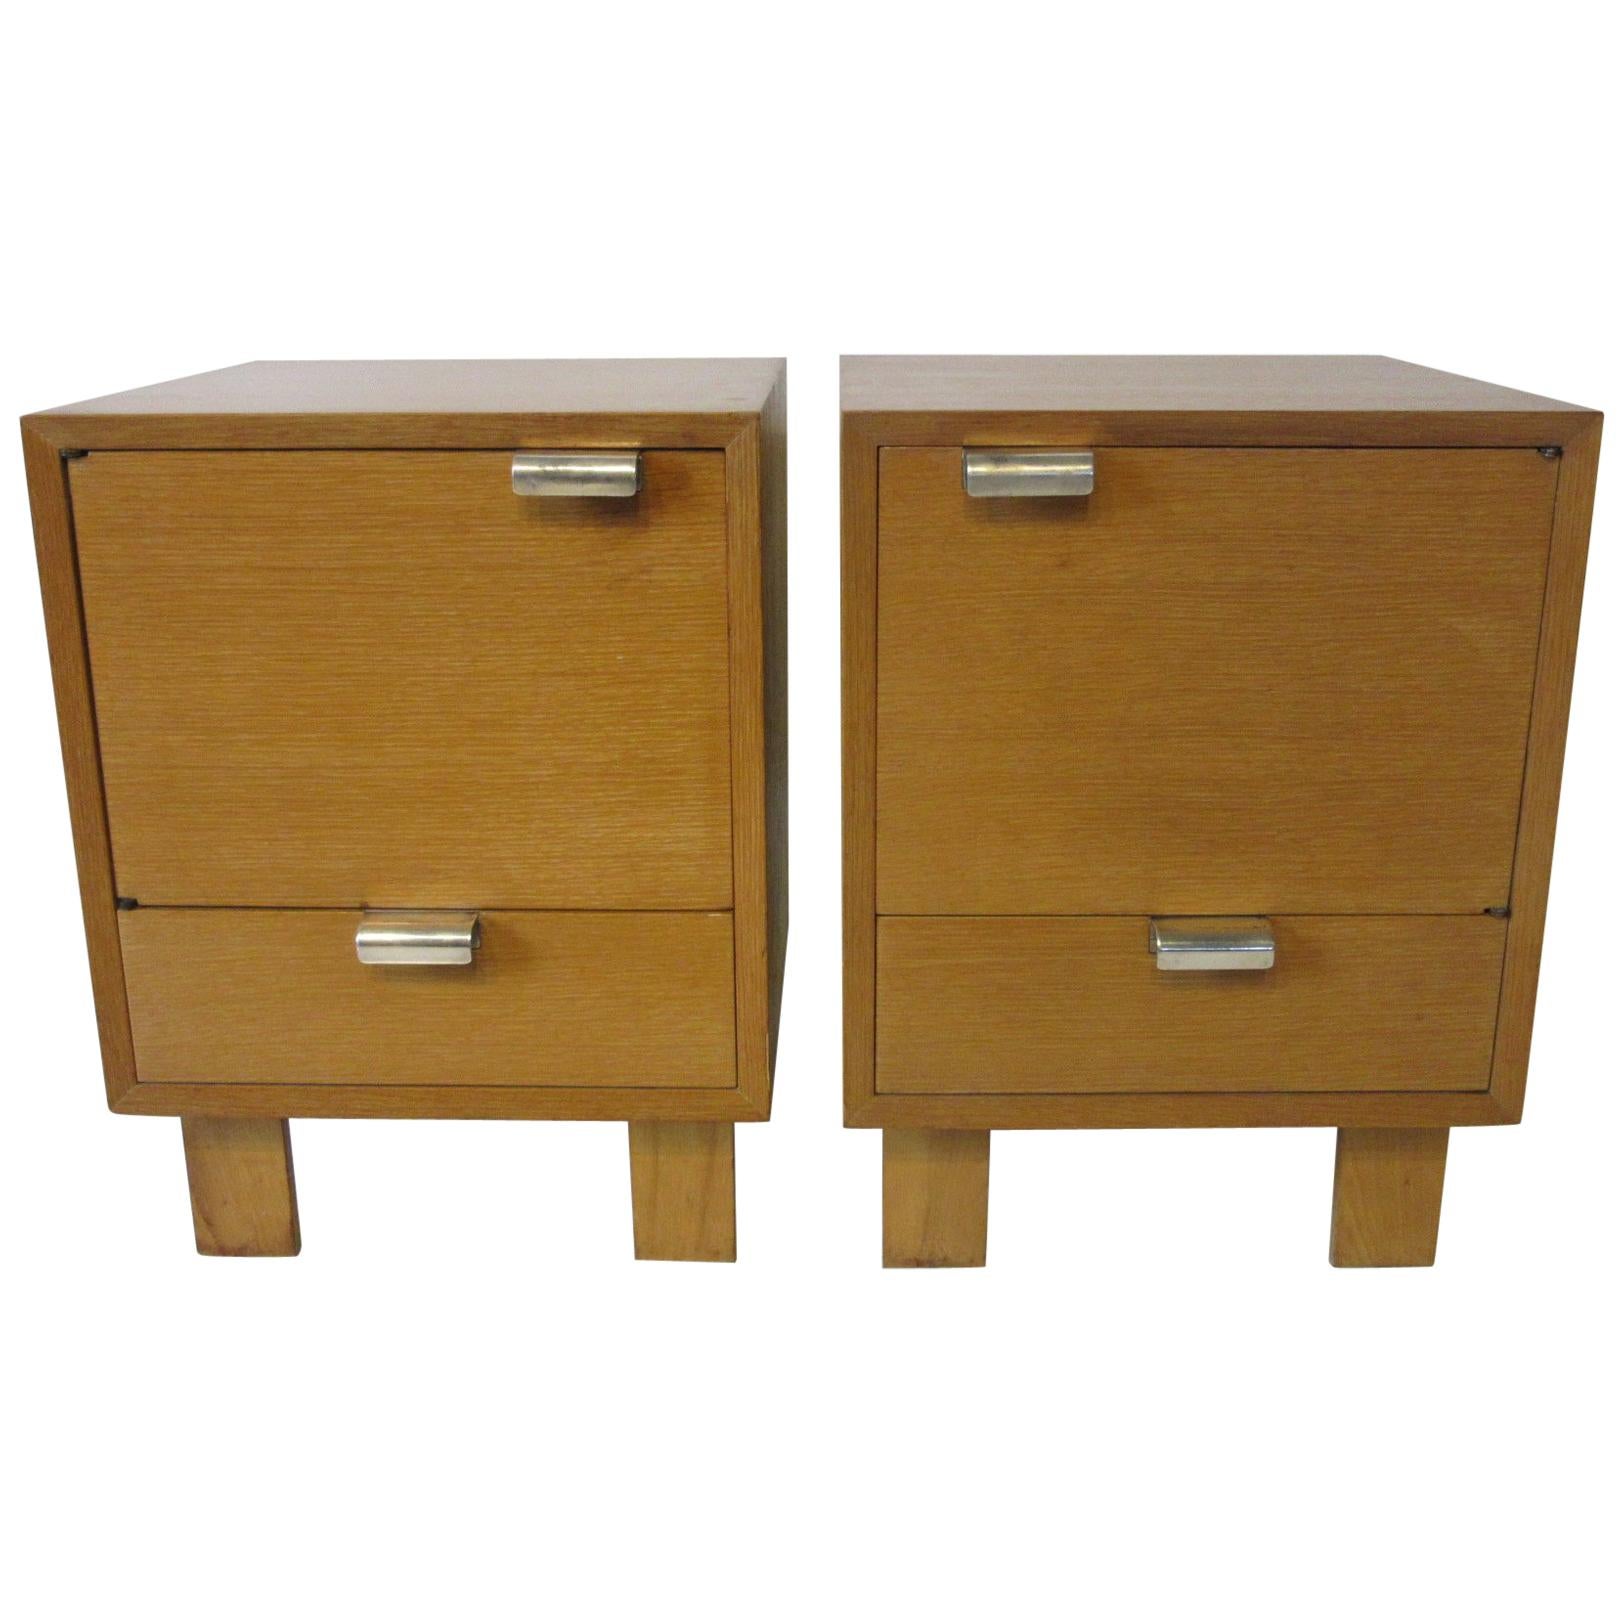 George Nelson Nightstands with Silver Plated Handles